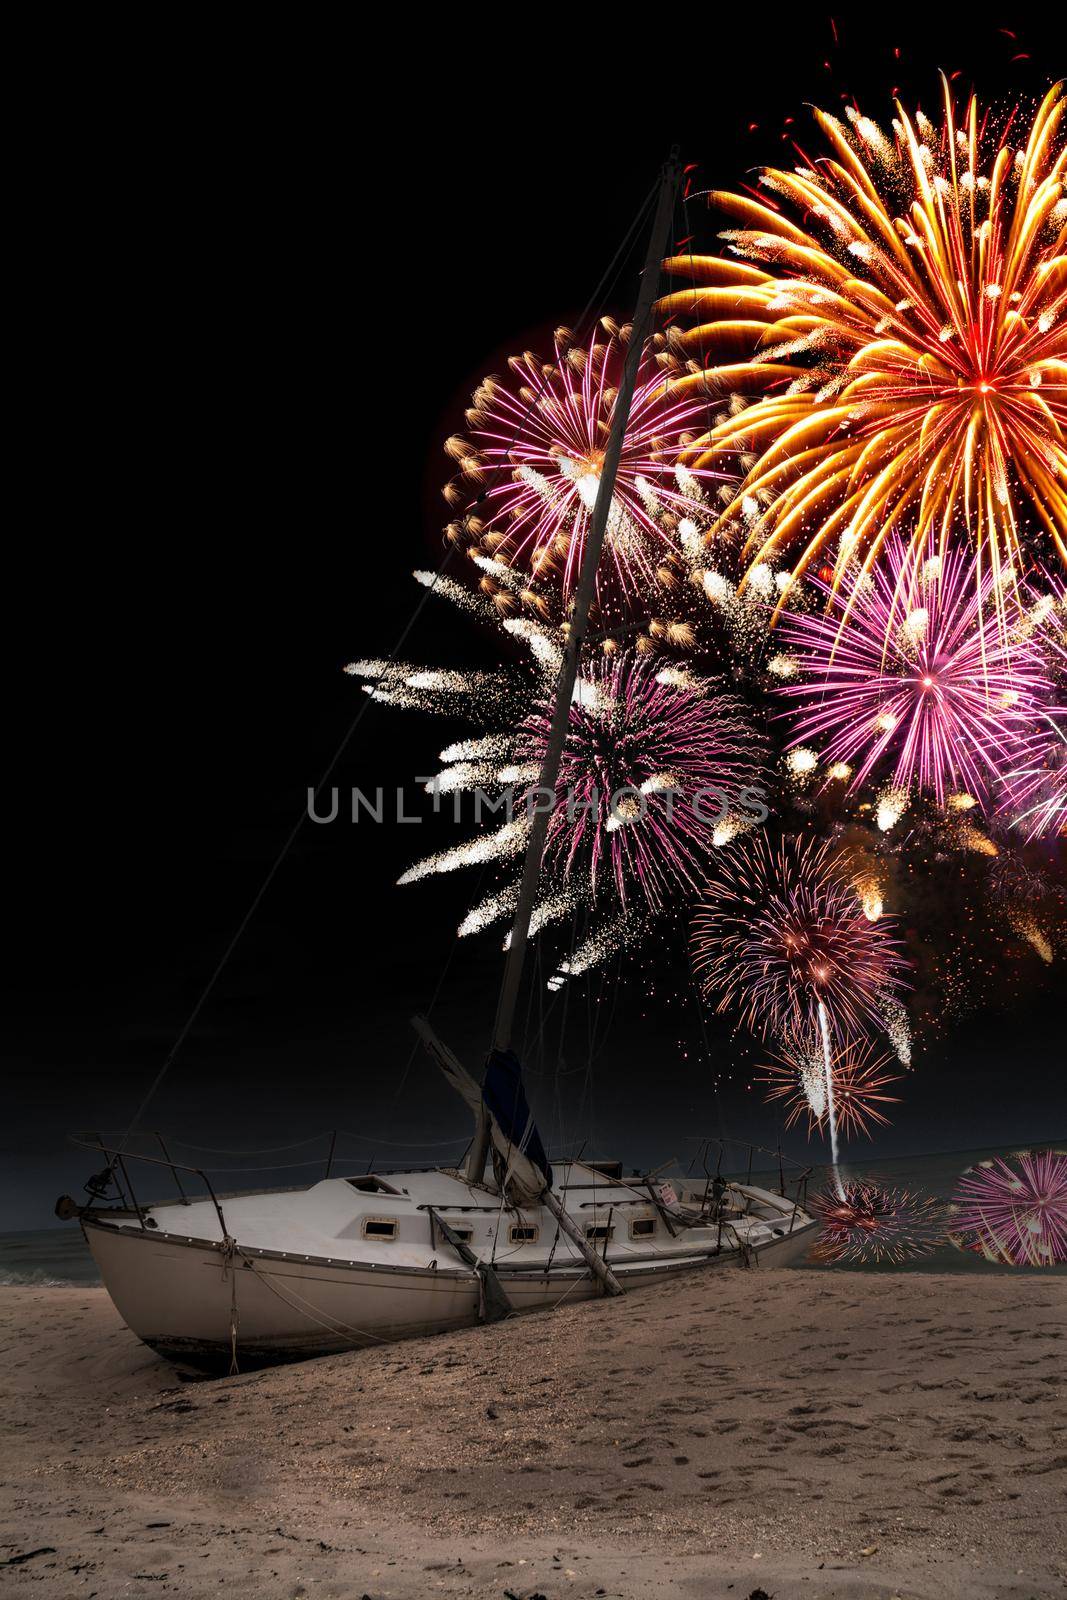 Fireworks in the night sky over a shipwreck off the coast of Clam Pass in Naples, Florida